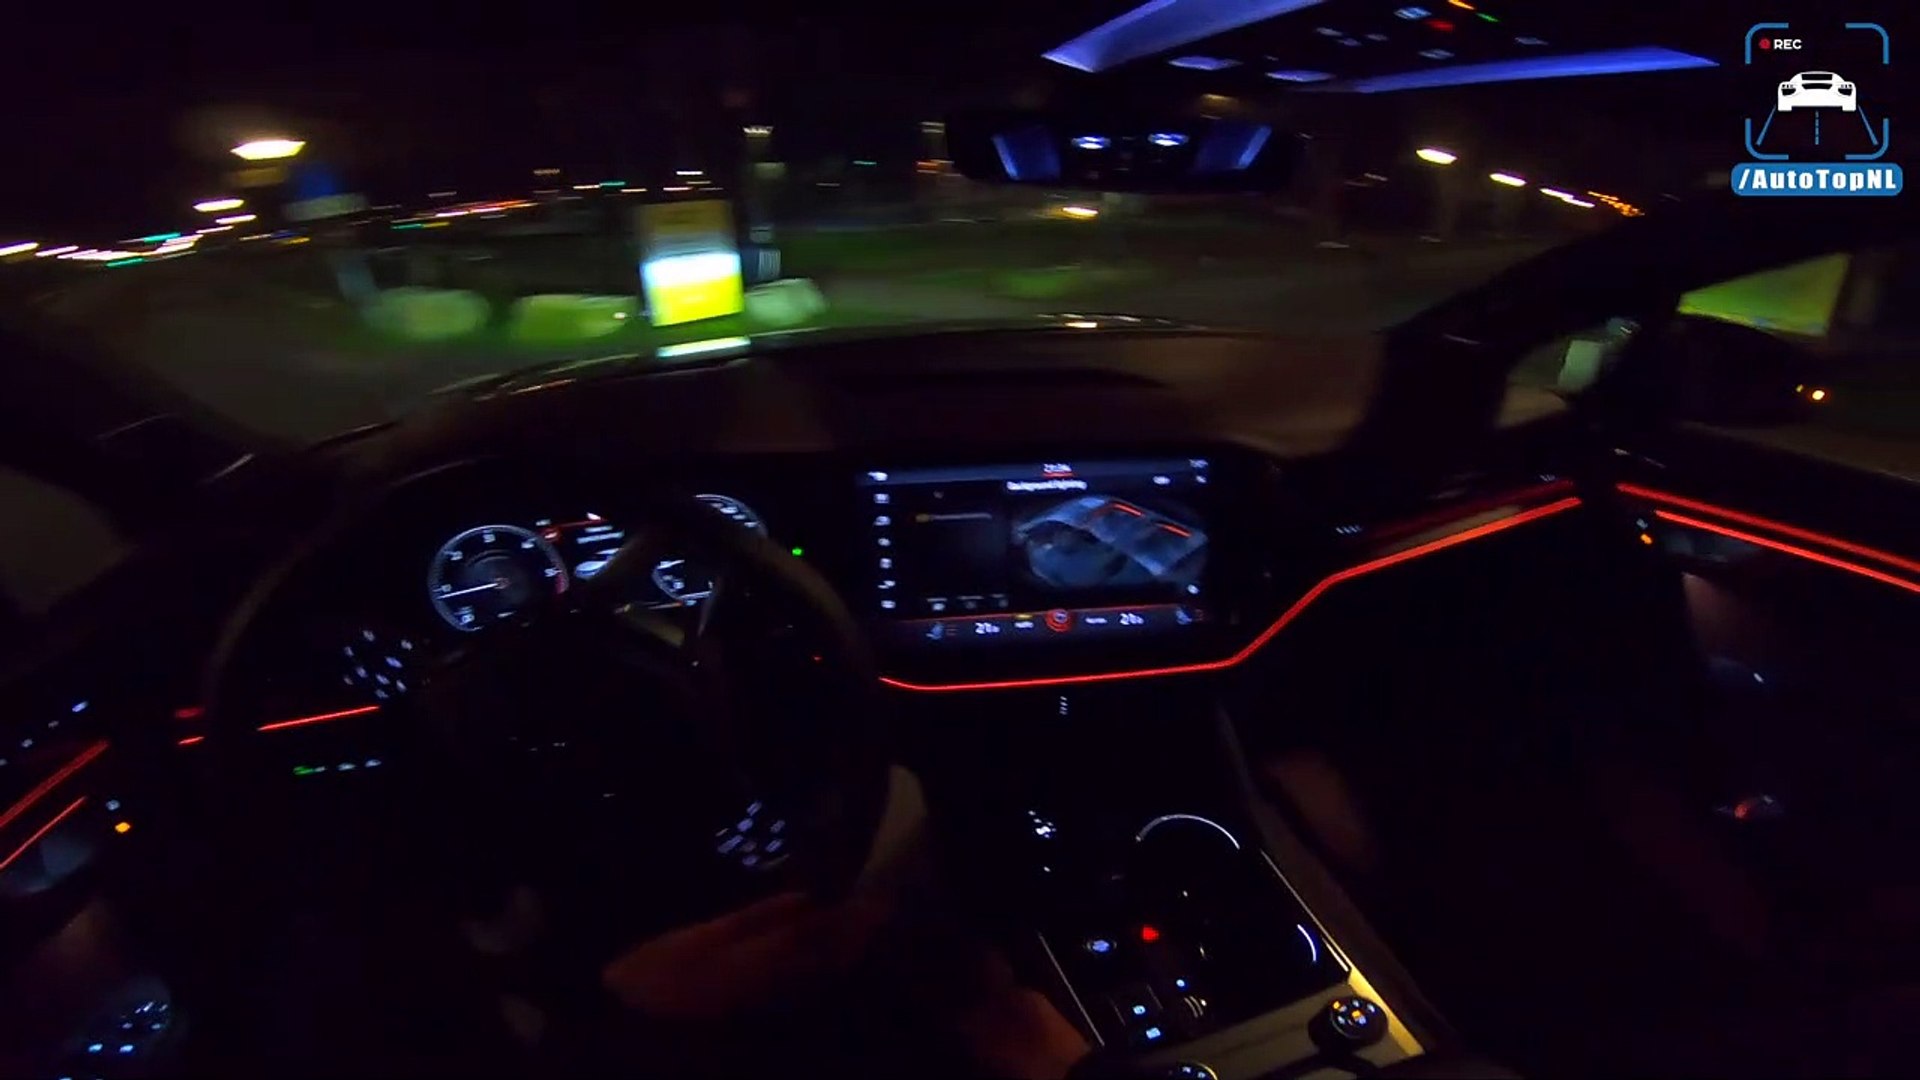 2019 Vw Touareg R Line Ambient Lighting Night Drive Pov By Autotopnl